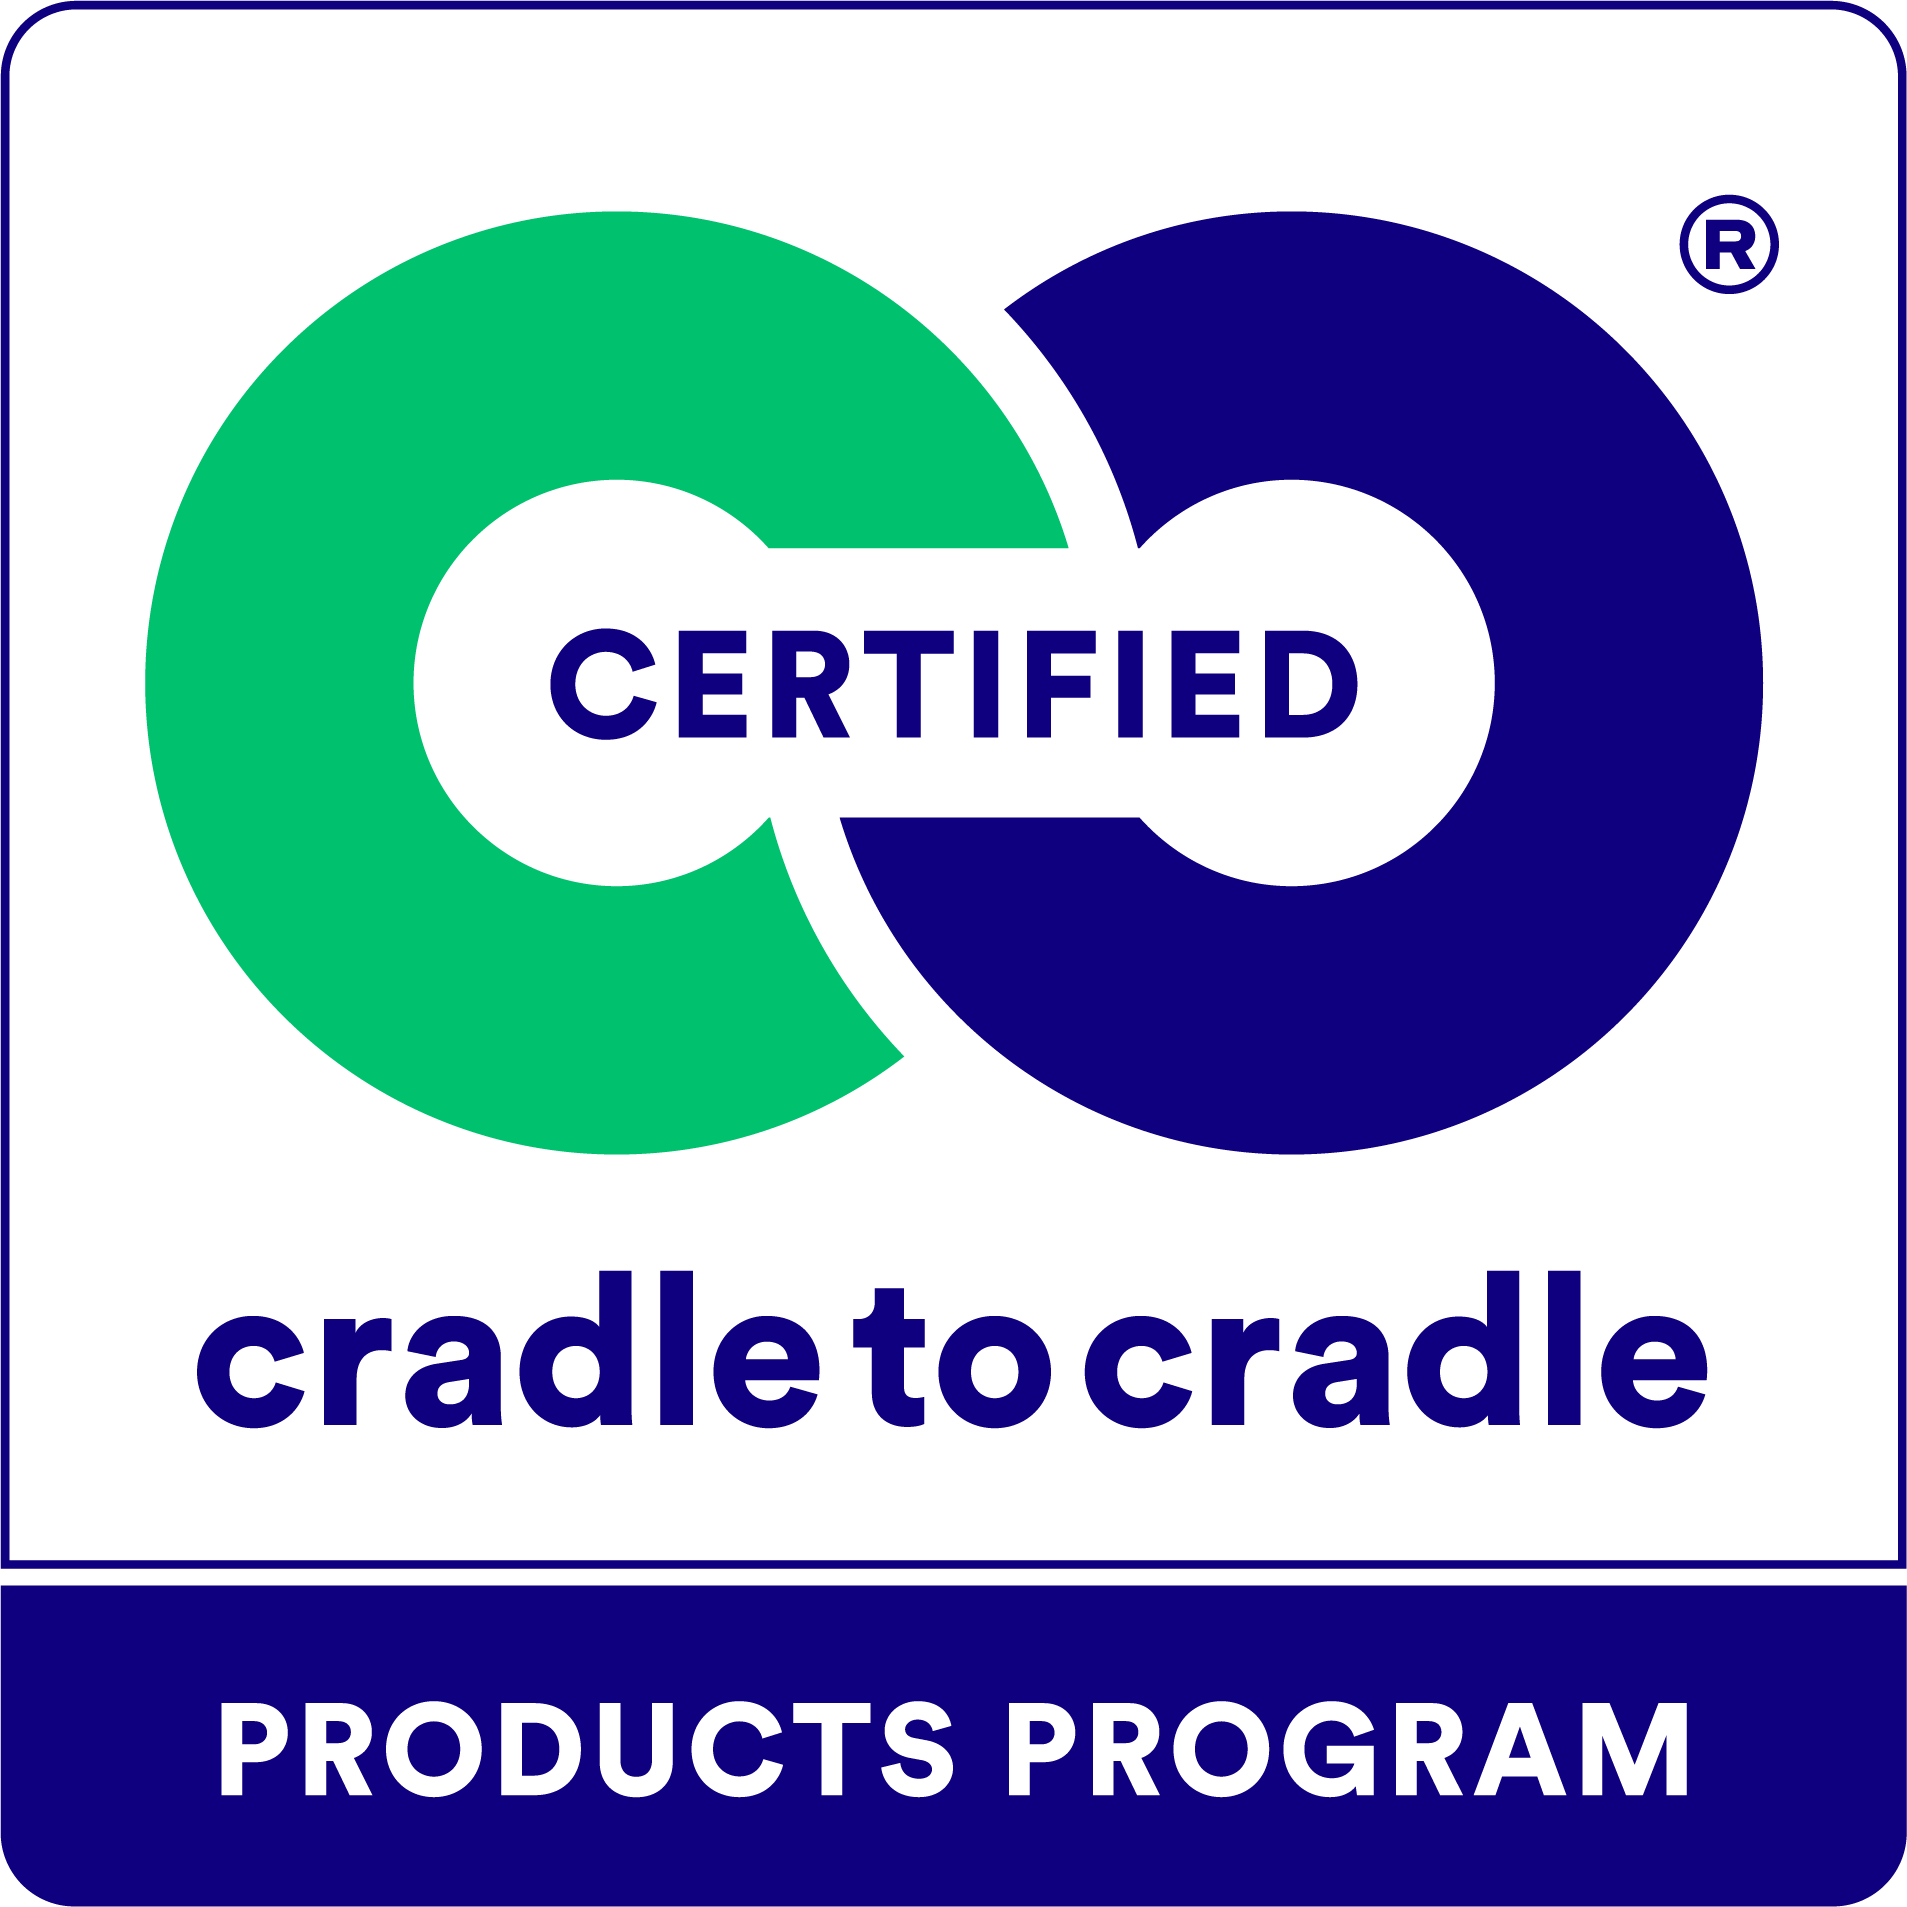 Click the image to go to Cradle to Cradle's website